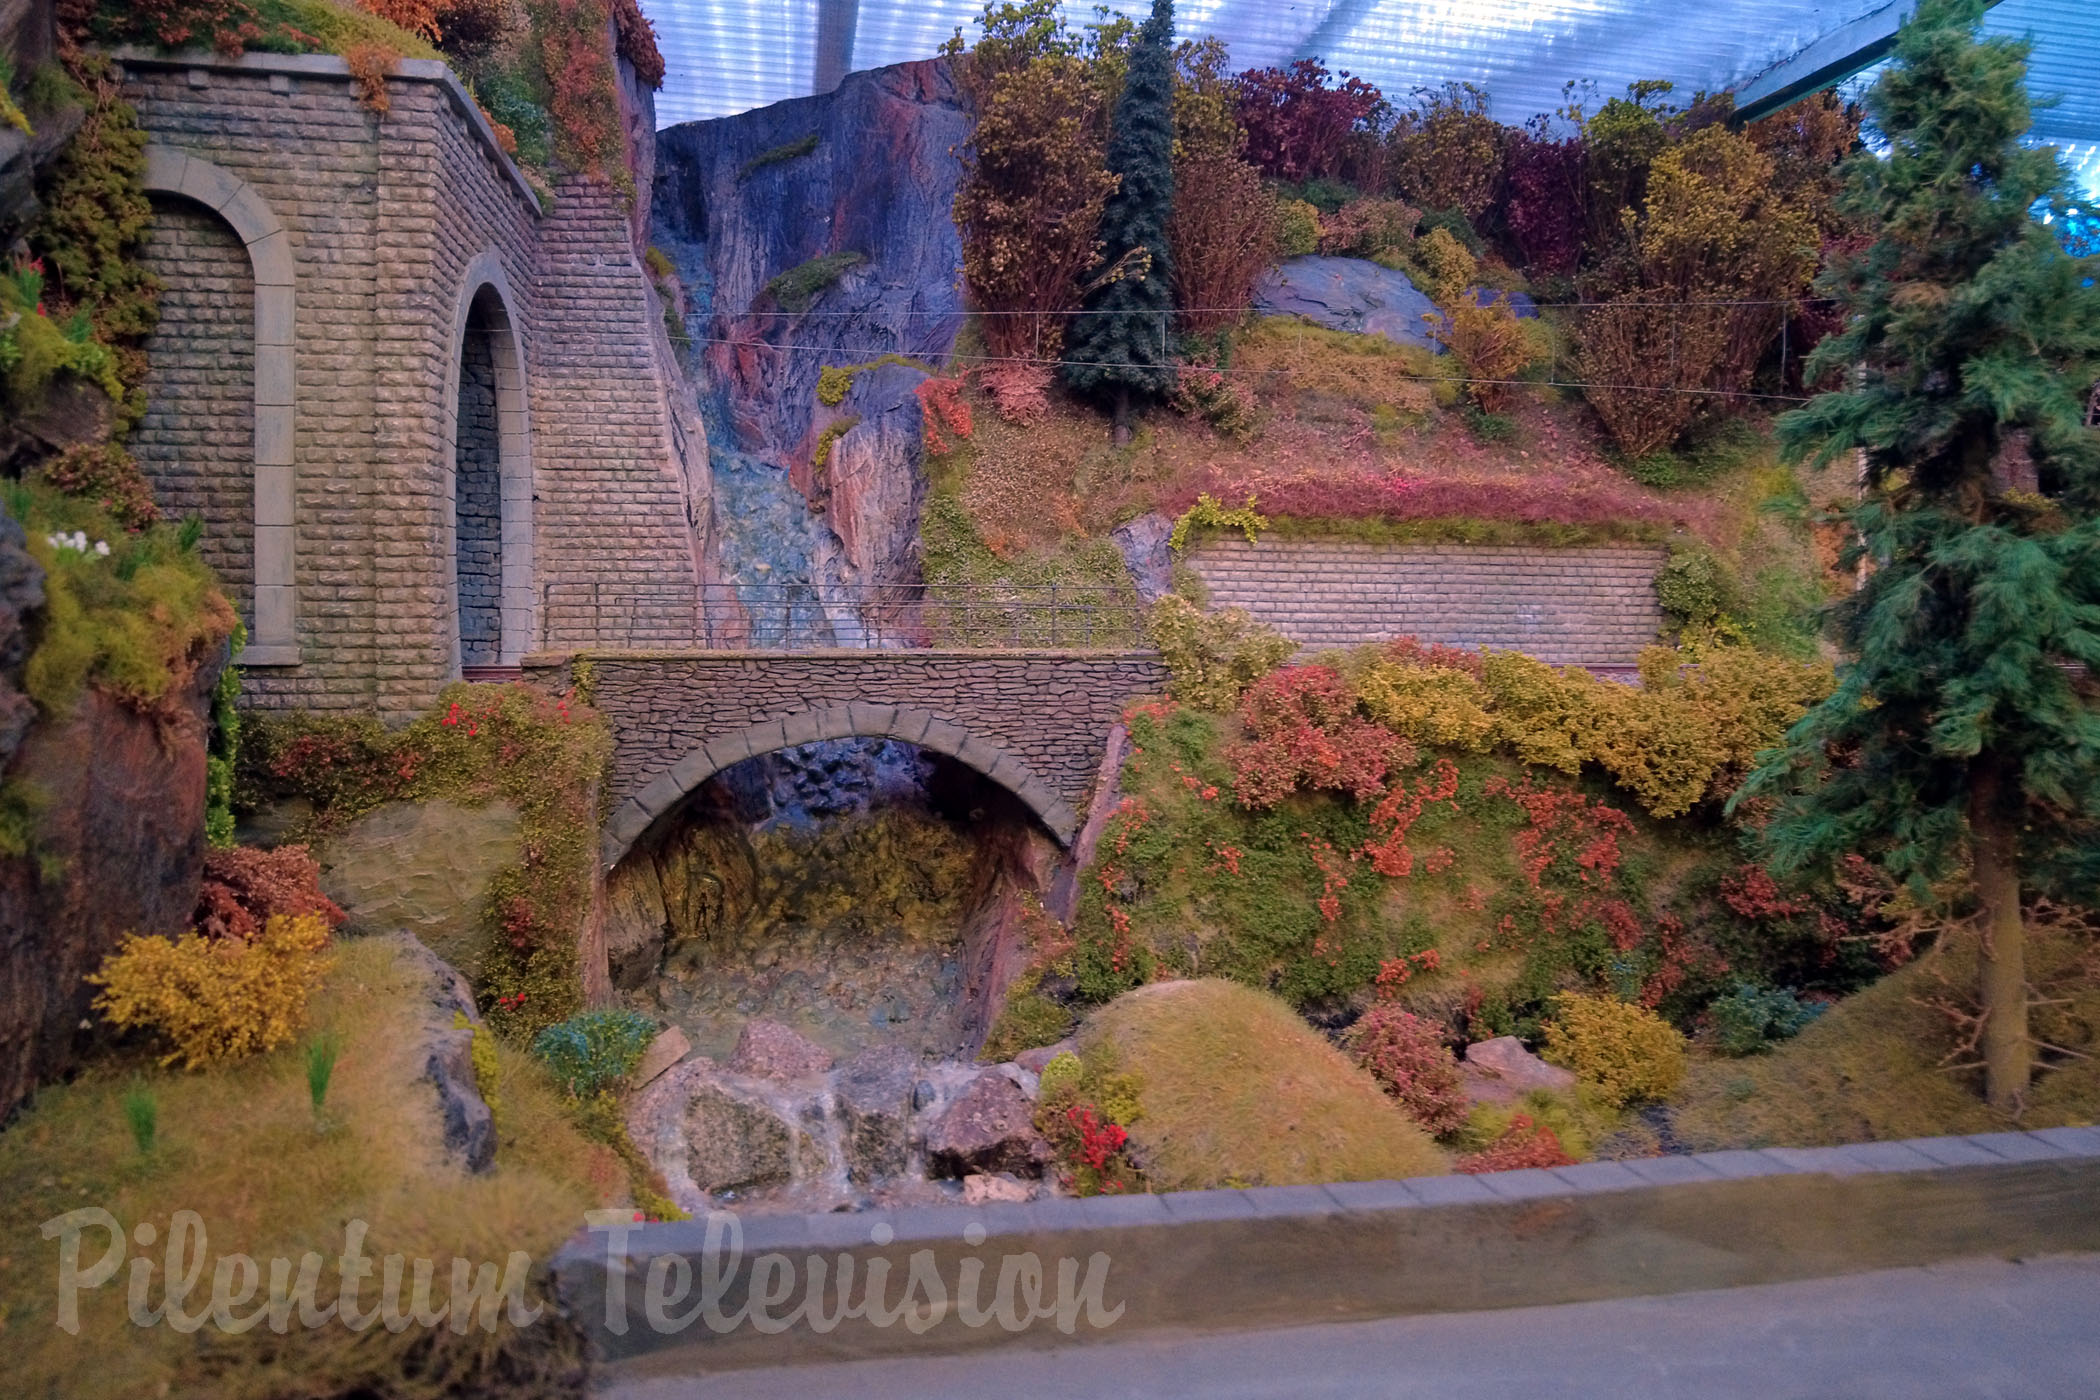 The brand new model railroad layout in gauge 1 (1/32 scale trains) by Leuvense Spooreen Vrienden